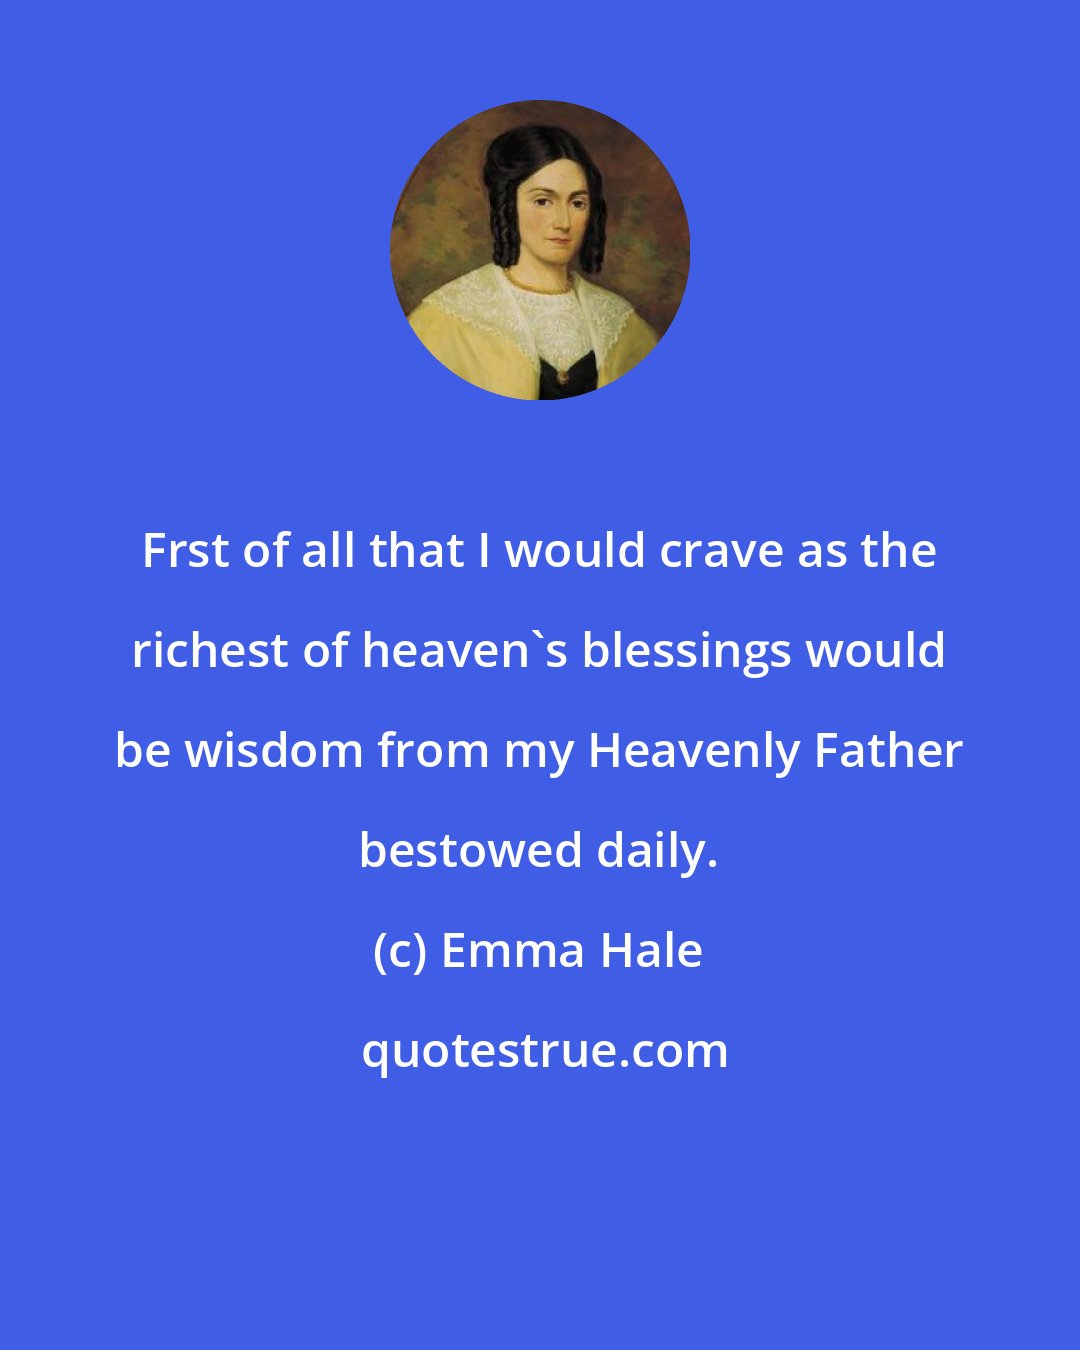 Emma Hale: Frst of all that I would crave as the richest of heaven's blessings would be wisdom from my Heavenly Father bestowed daily.